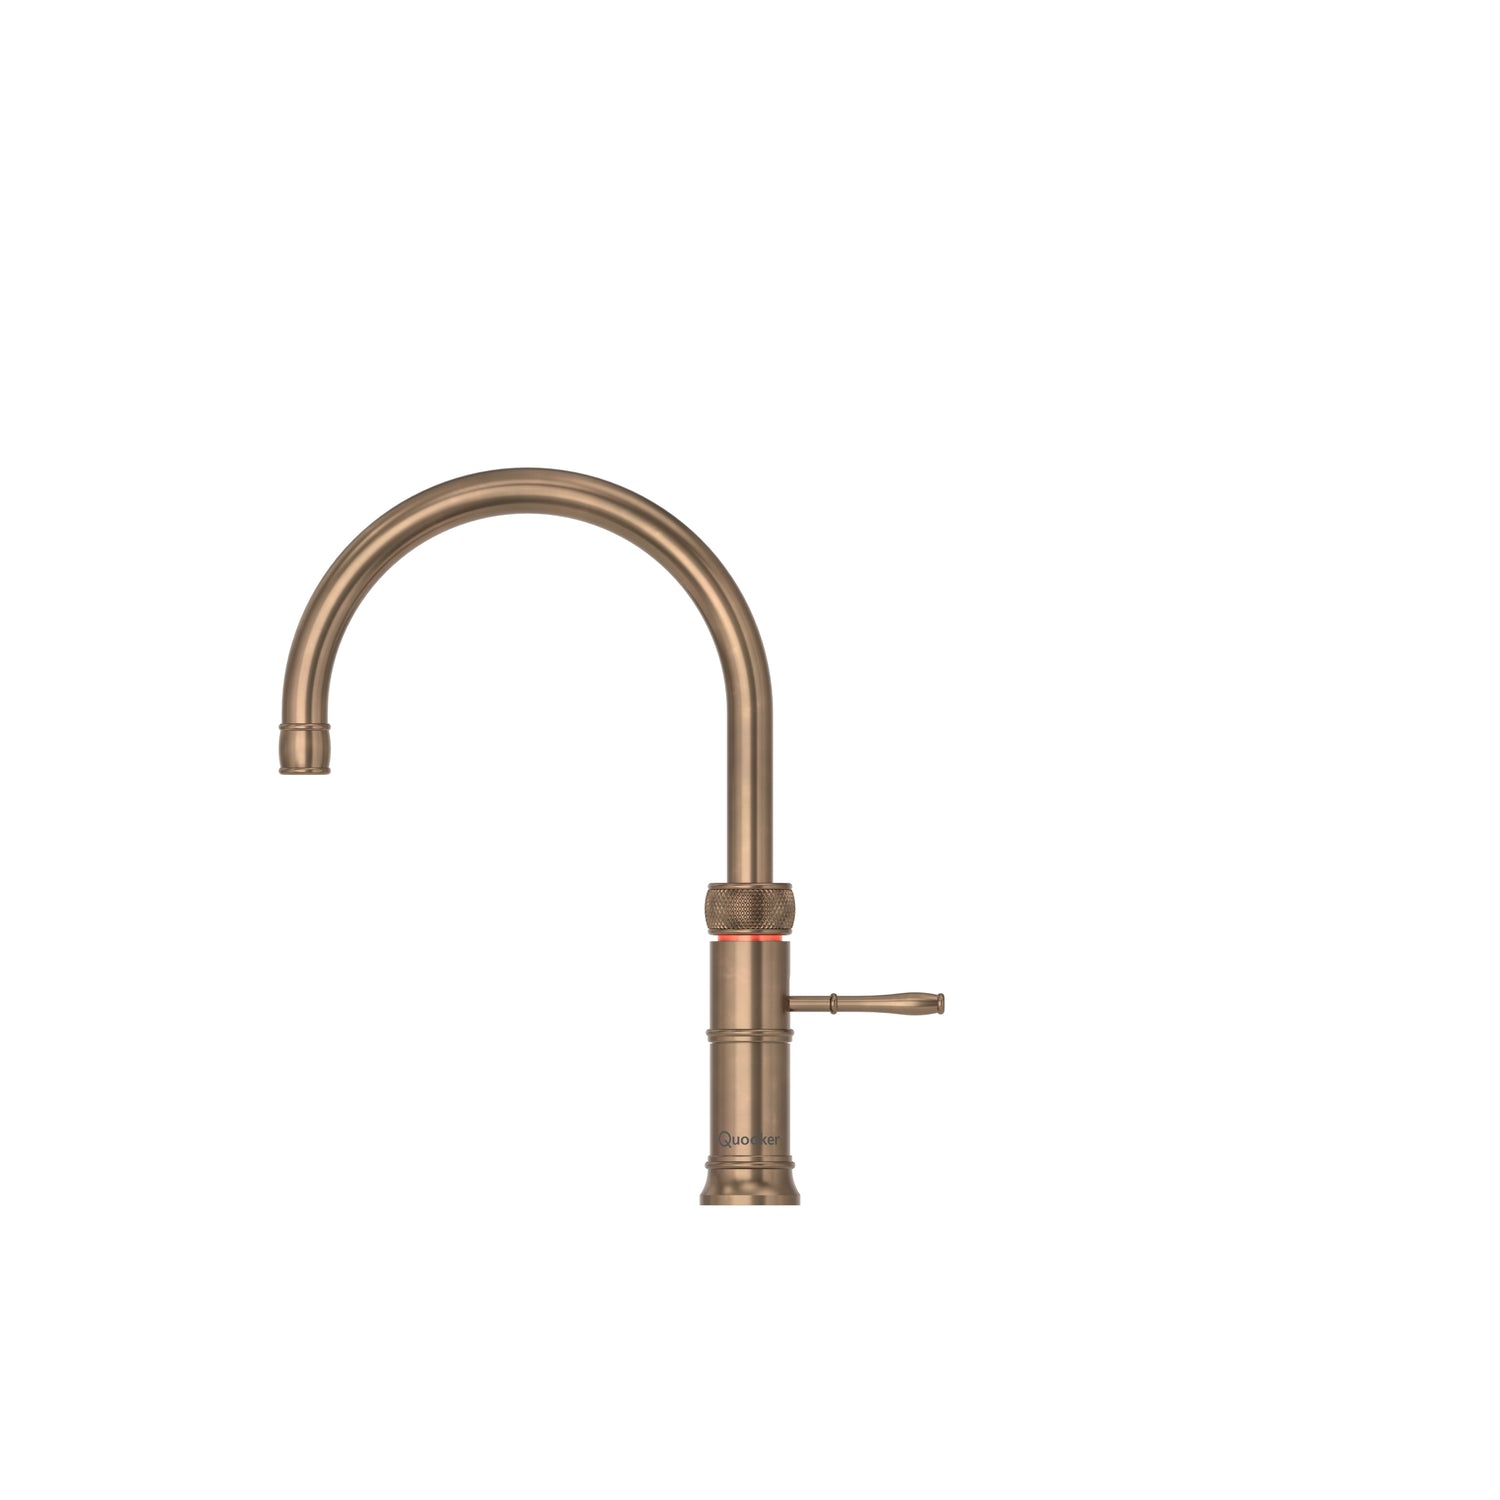 Quooker Classic Fusion Round Tap finished in patinated brass.